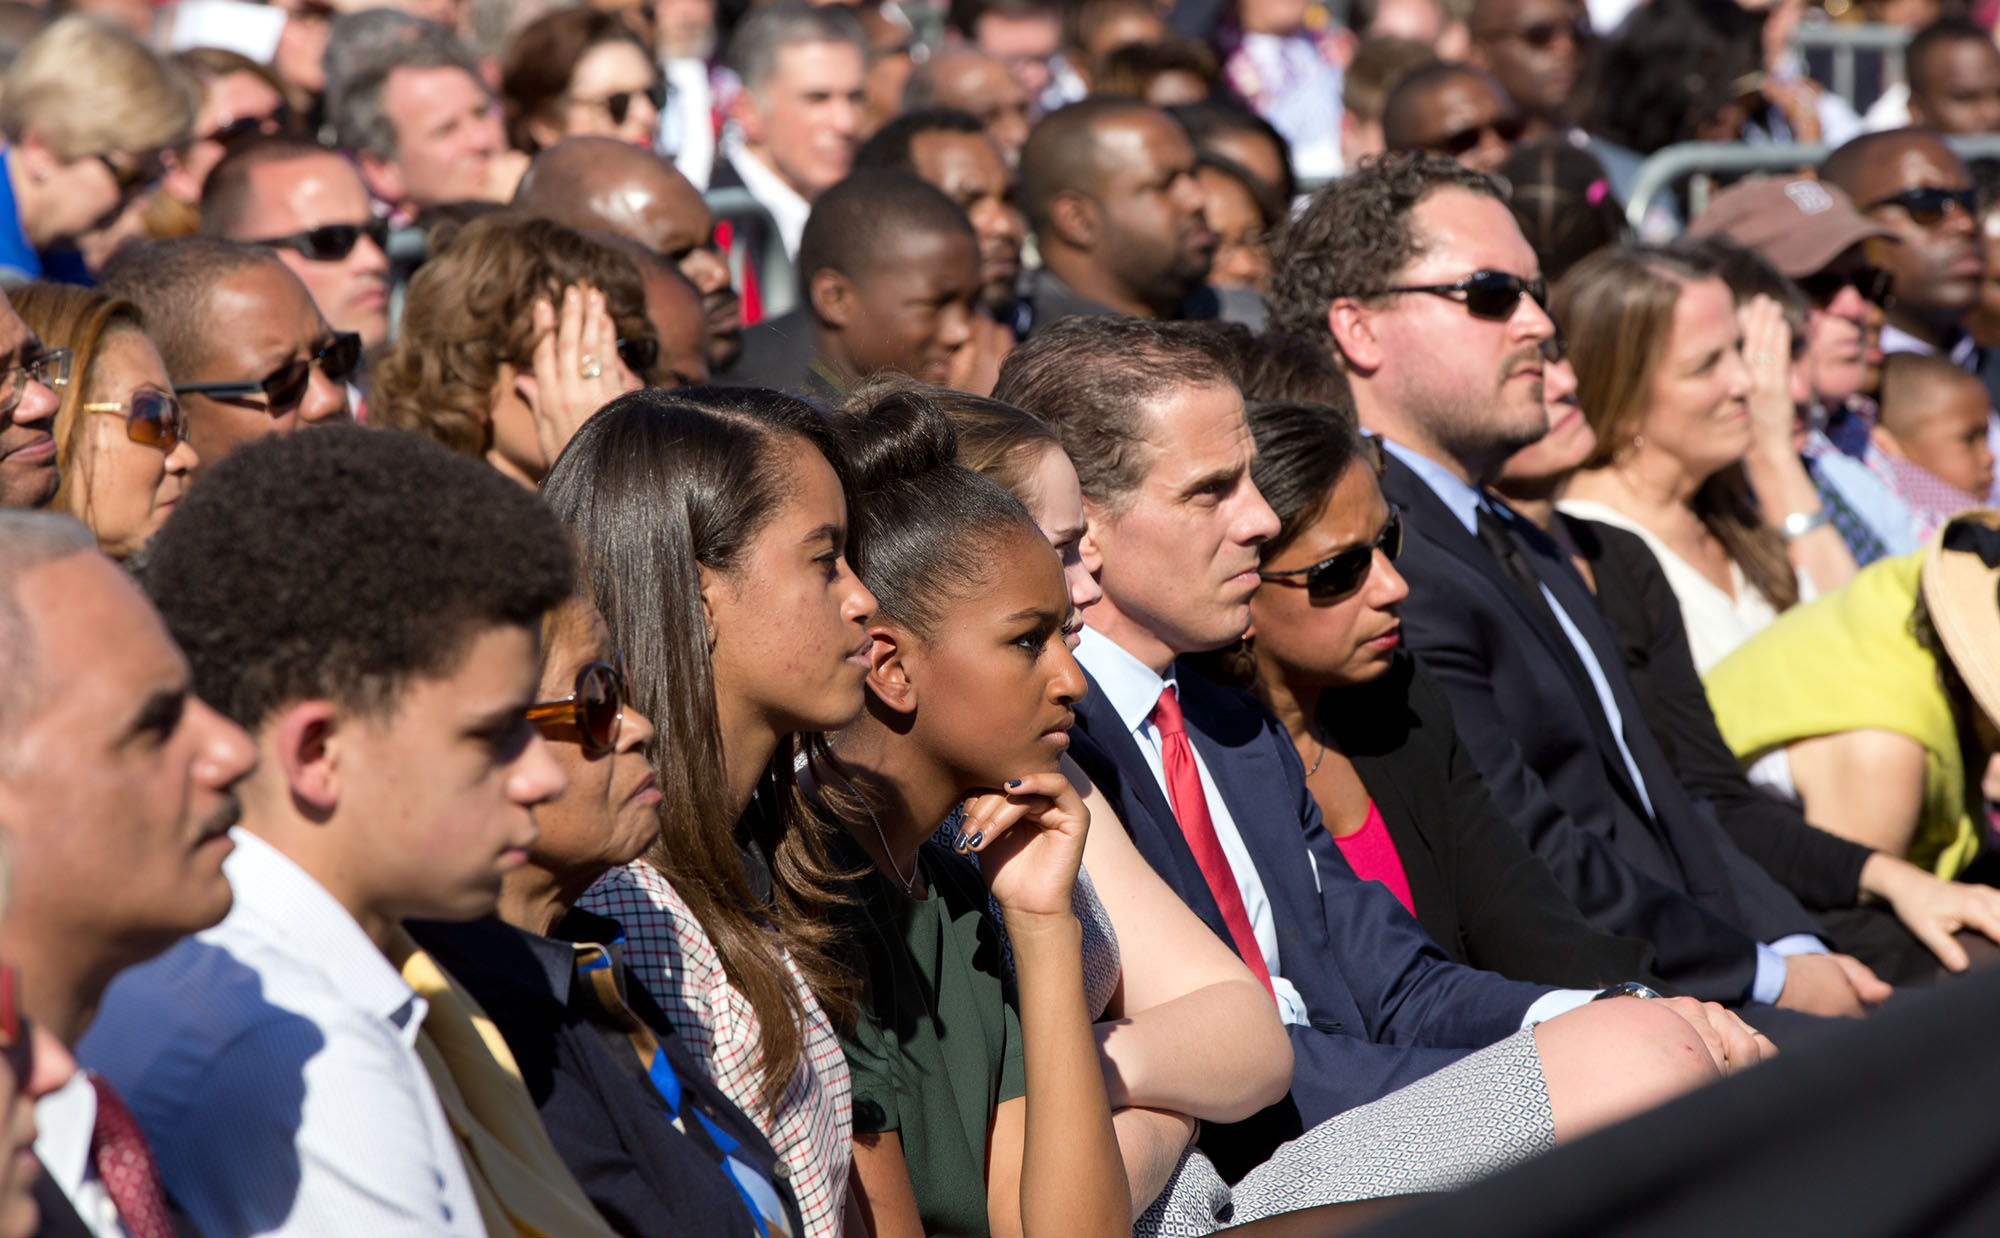 Malia and Sasha Obama and other family, friends, and White House staff listen to the President. Attorney General Eric Holder is at far left. (Official White House Photo by Pete Souza)